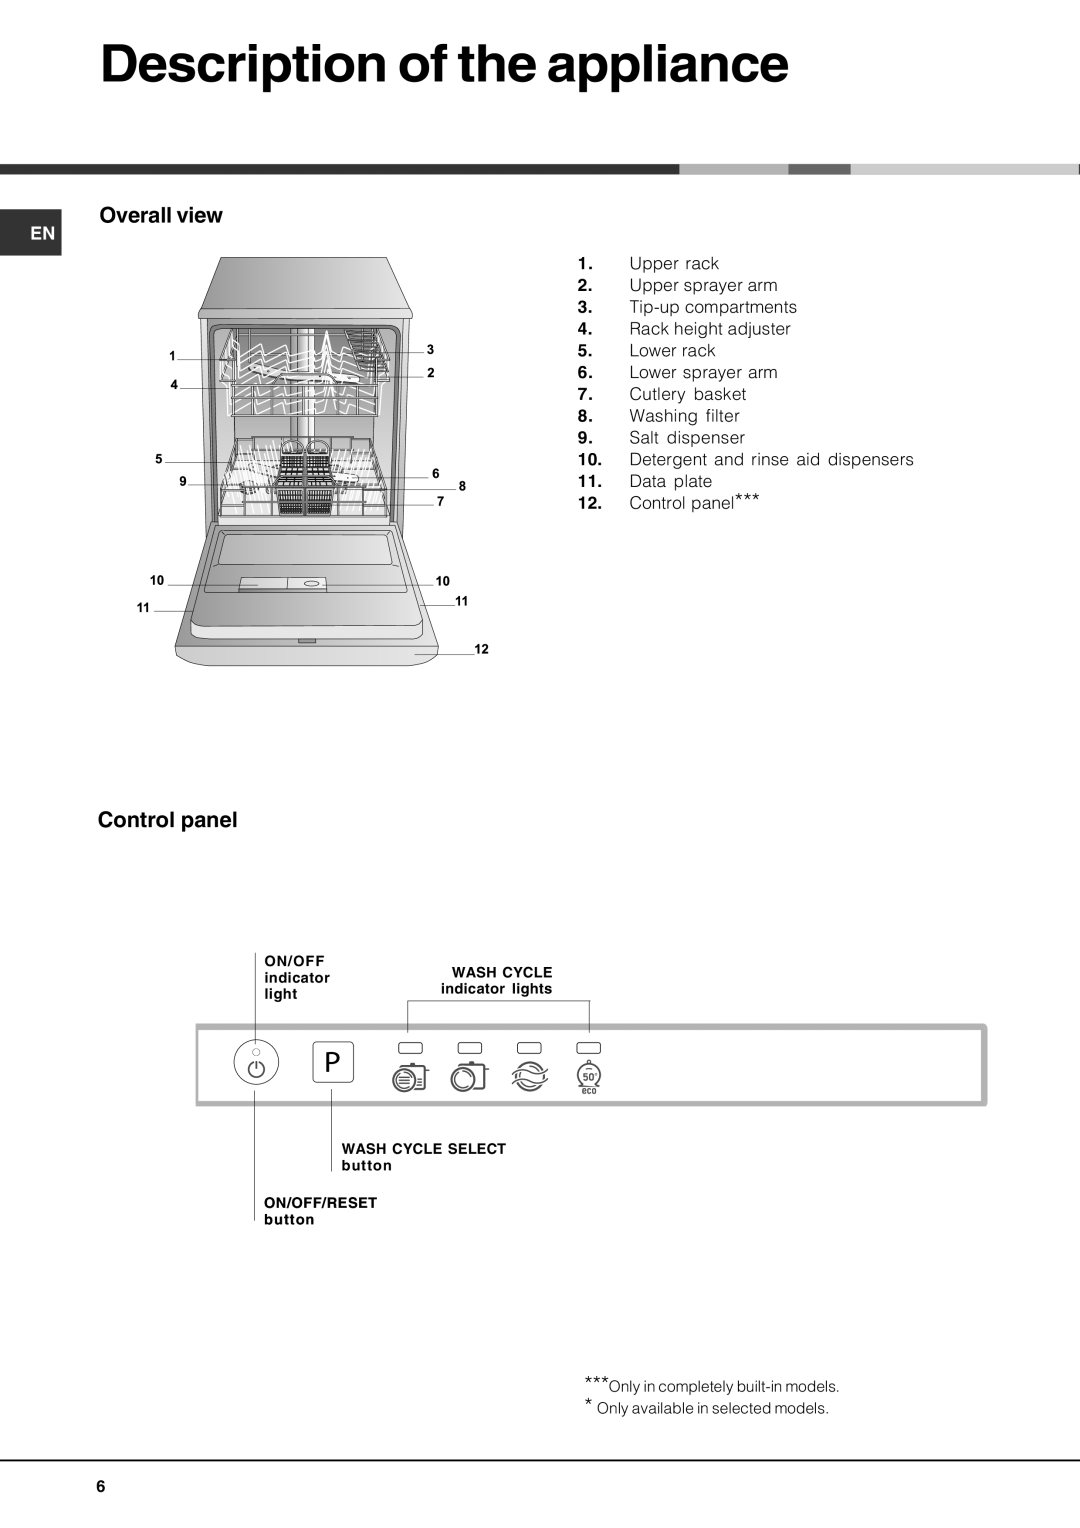 Hotpoint LFT04 manual Description of the appliance, Overall view, Control panel 